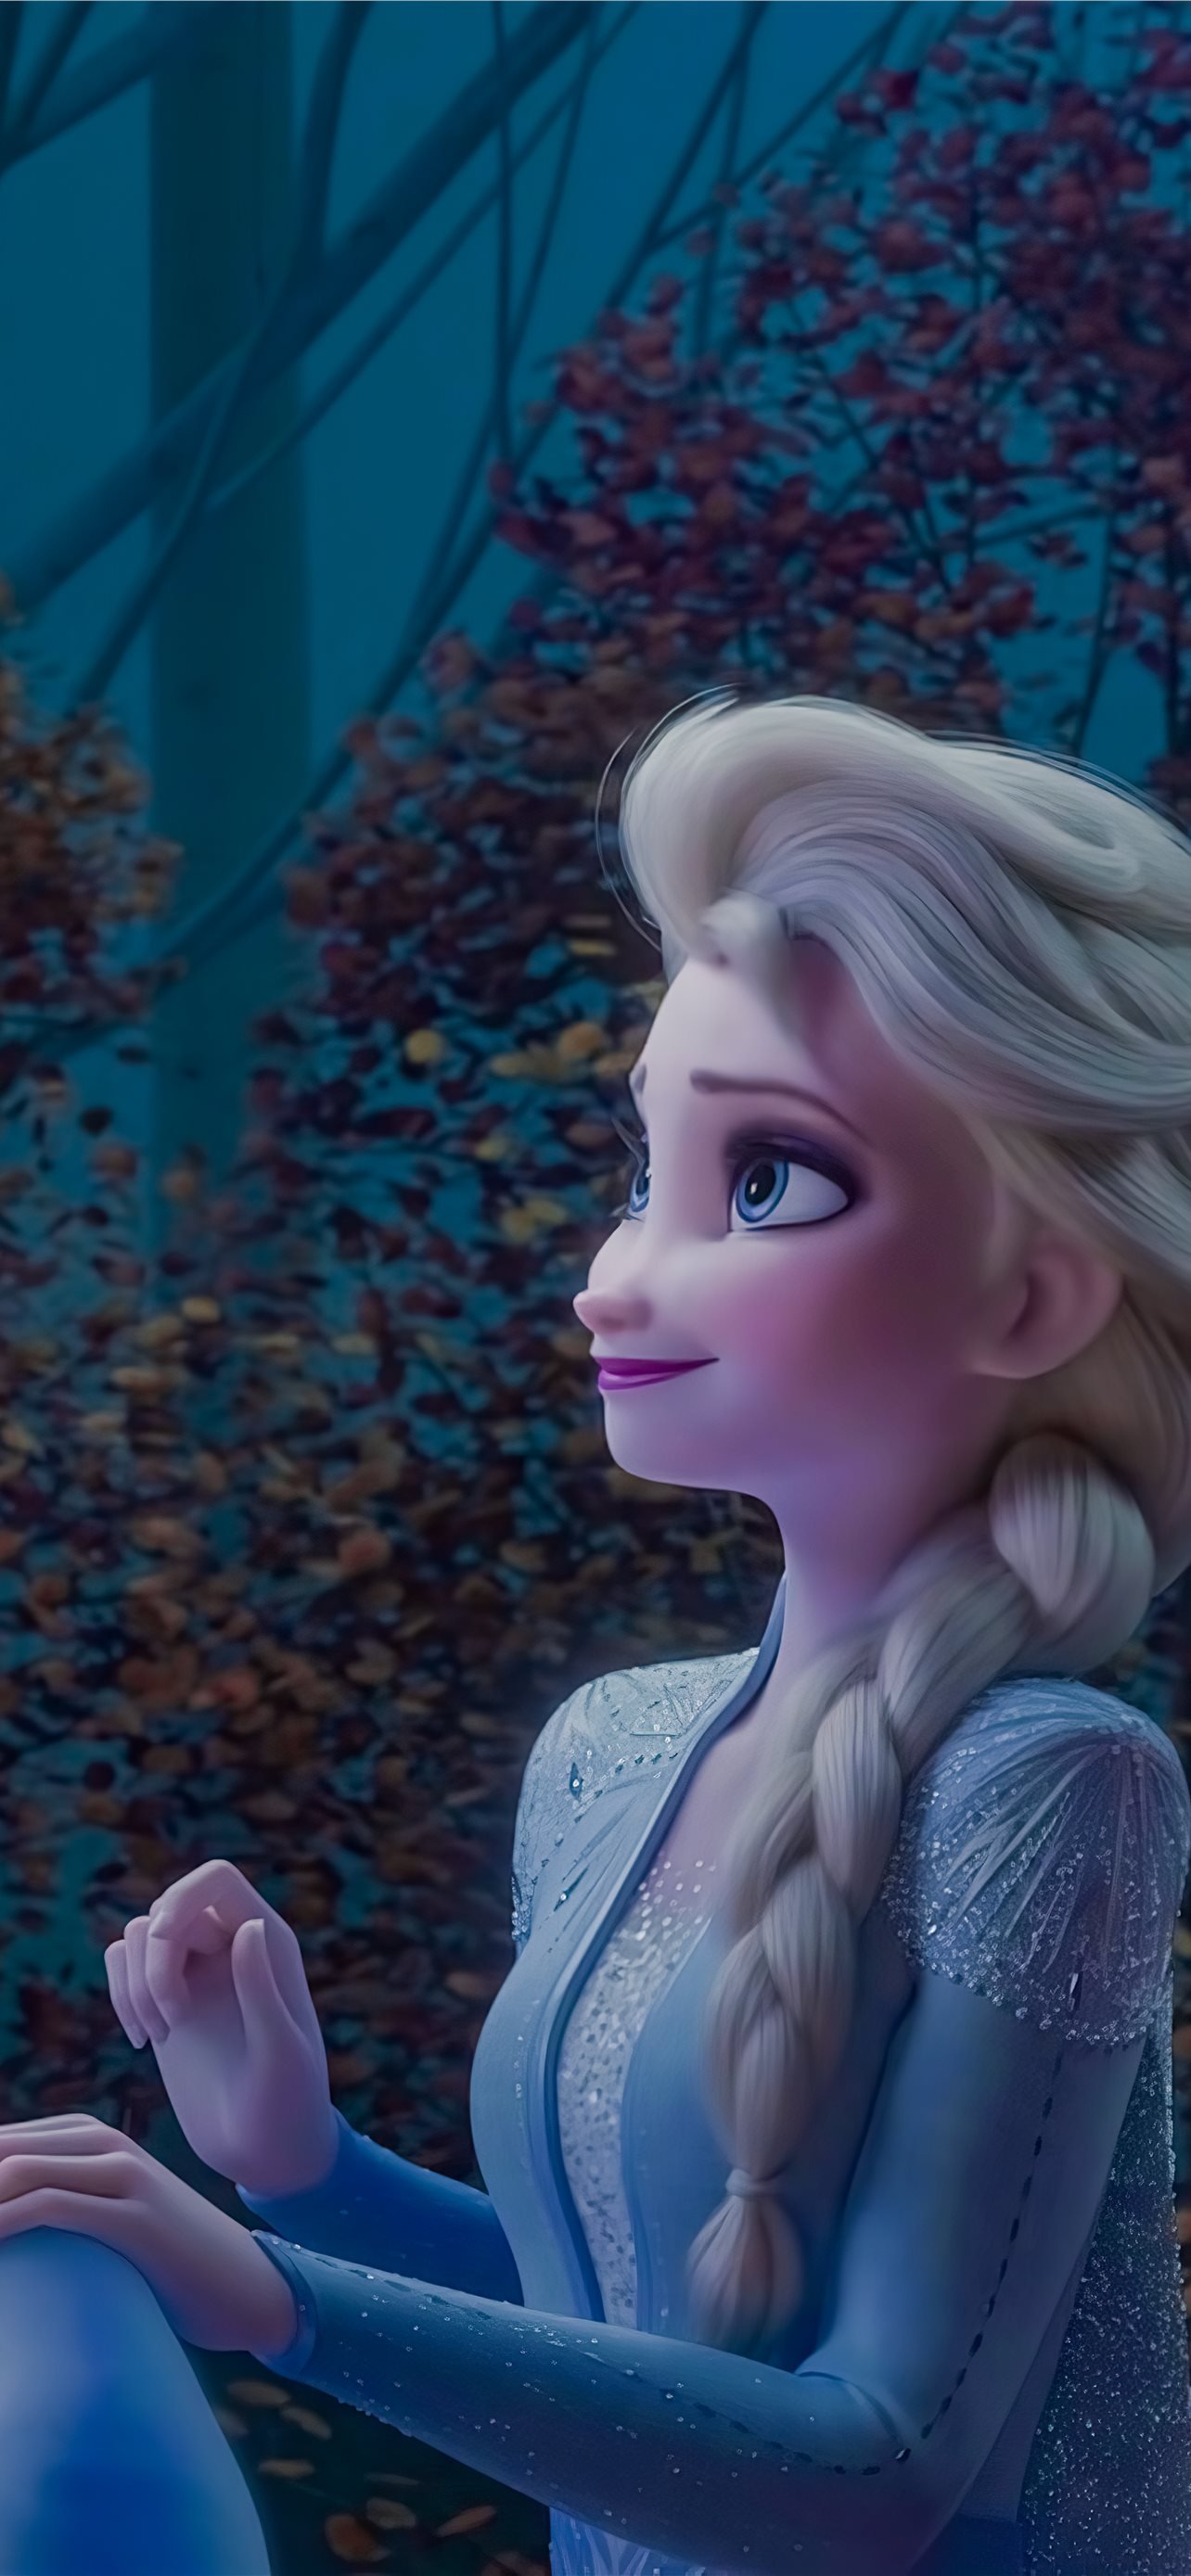 70 Frozen 2 HD Wallpapers and Backgrounds